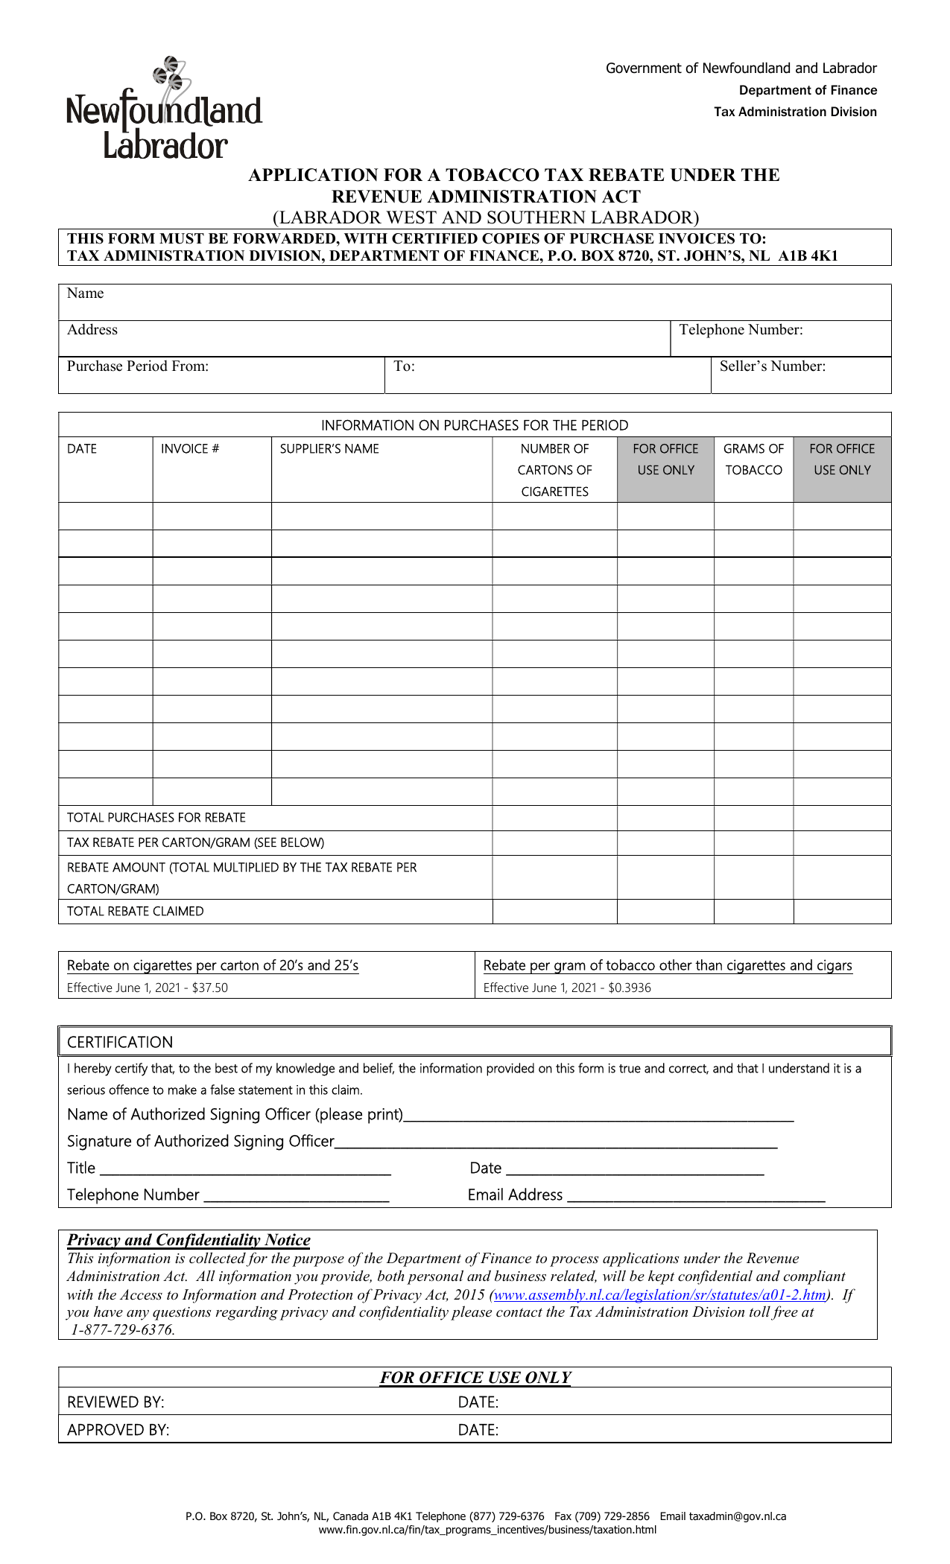 Application for a Tobacco Tax Rebate Under the Revenue Administration Act - Newfoundland and Labrador, Canada, Page 1